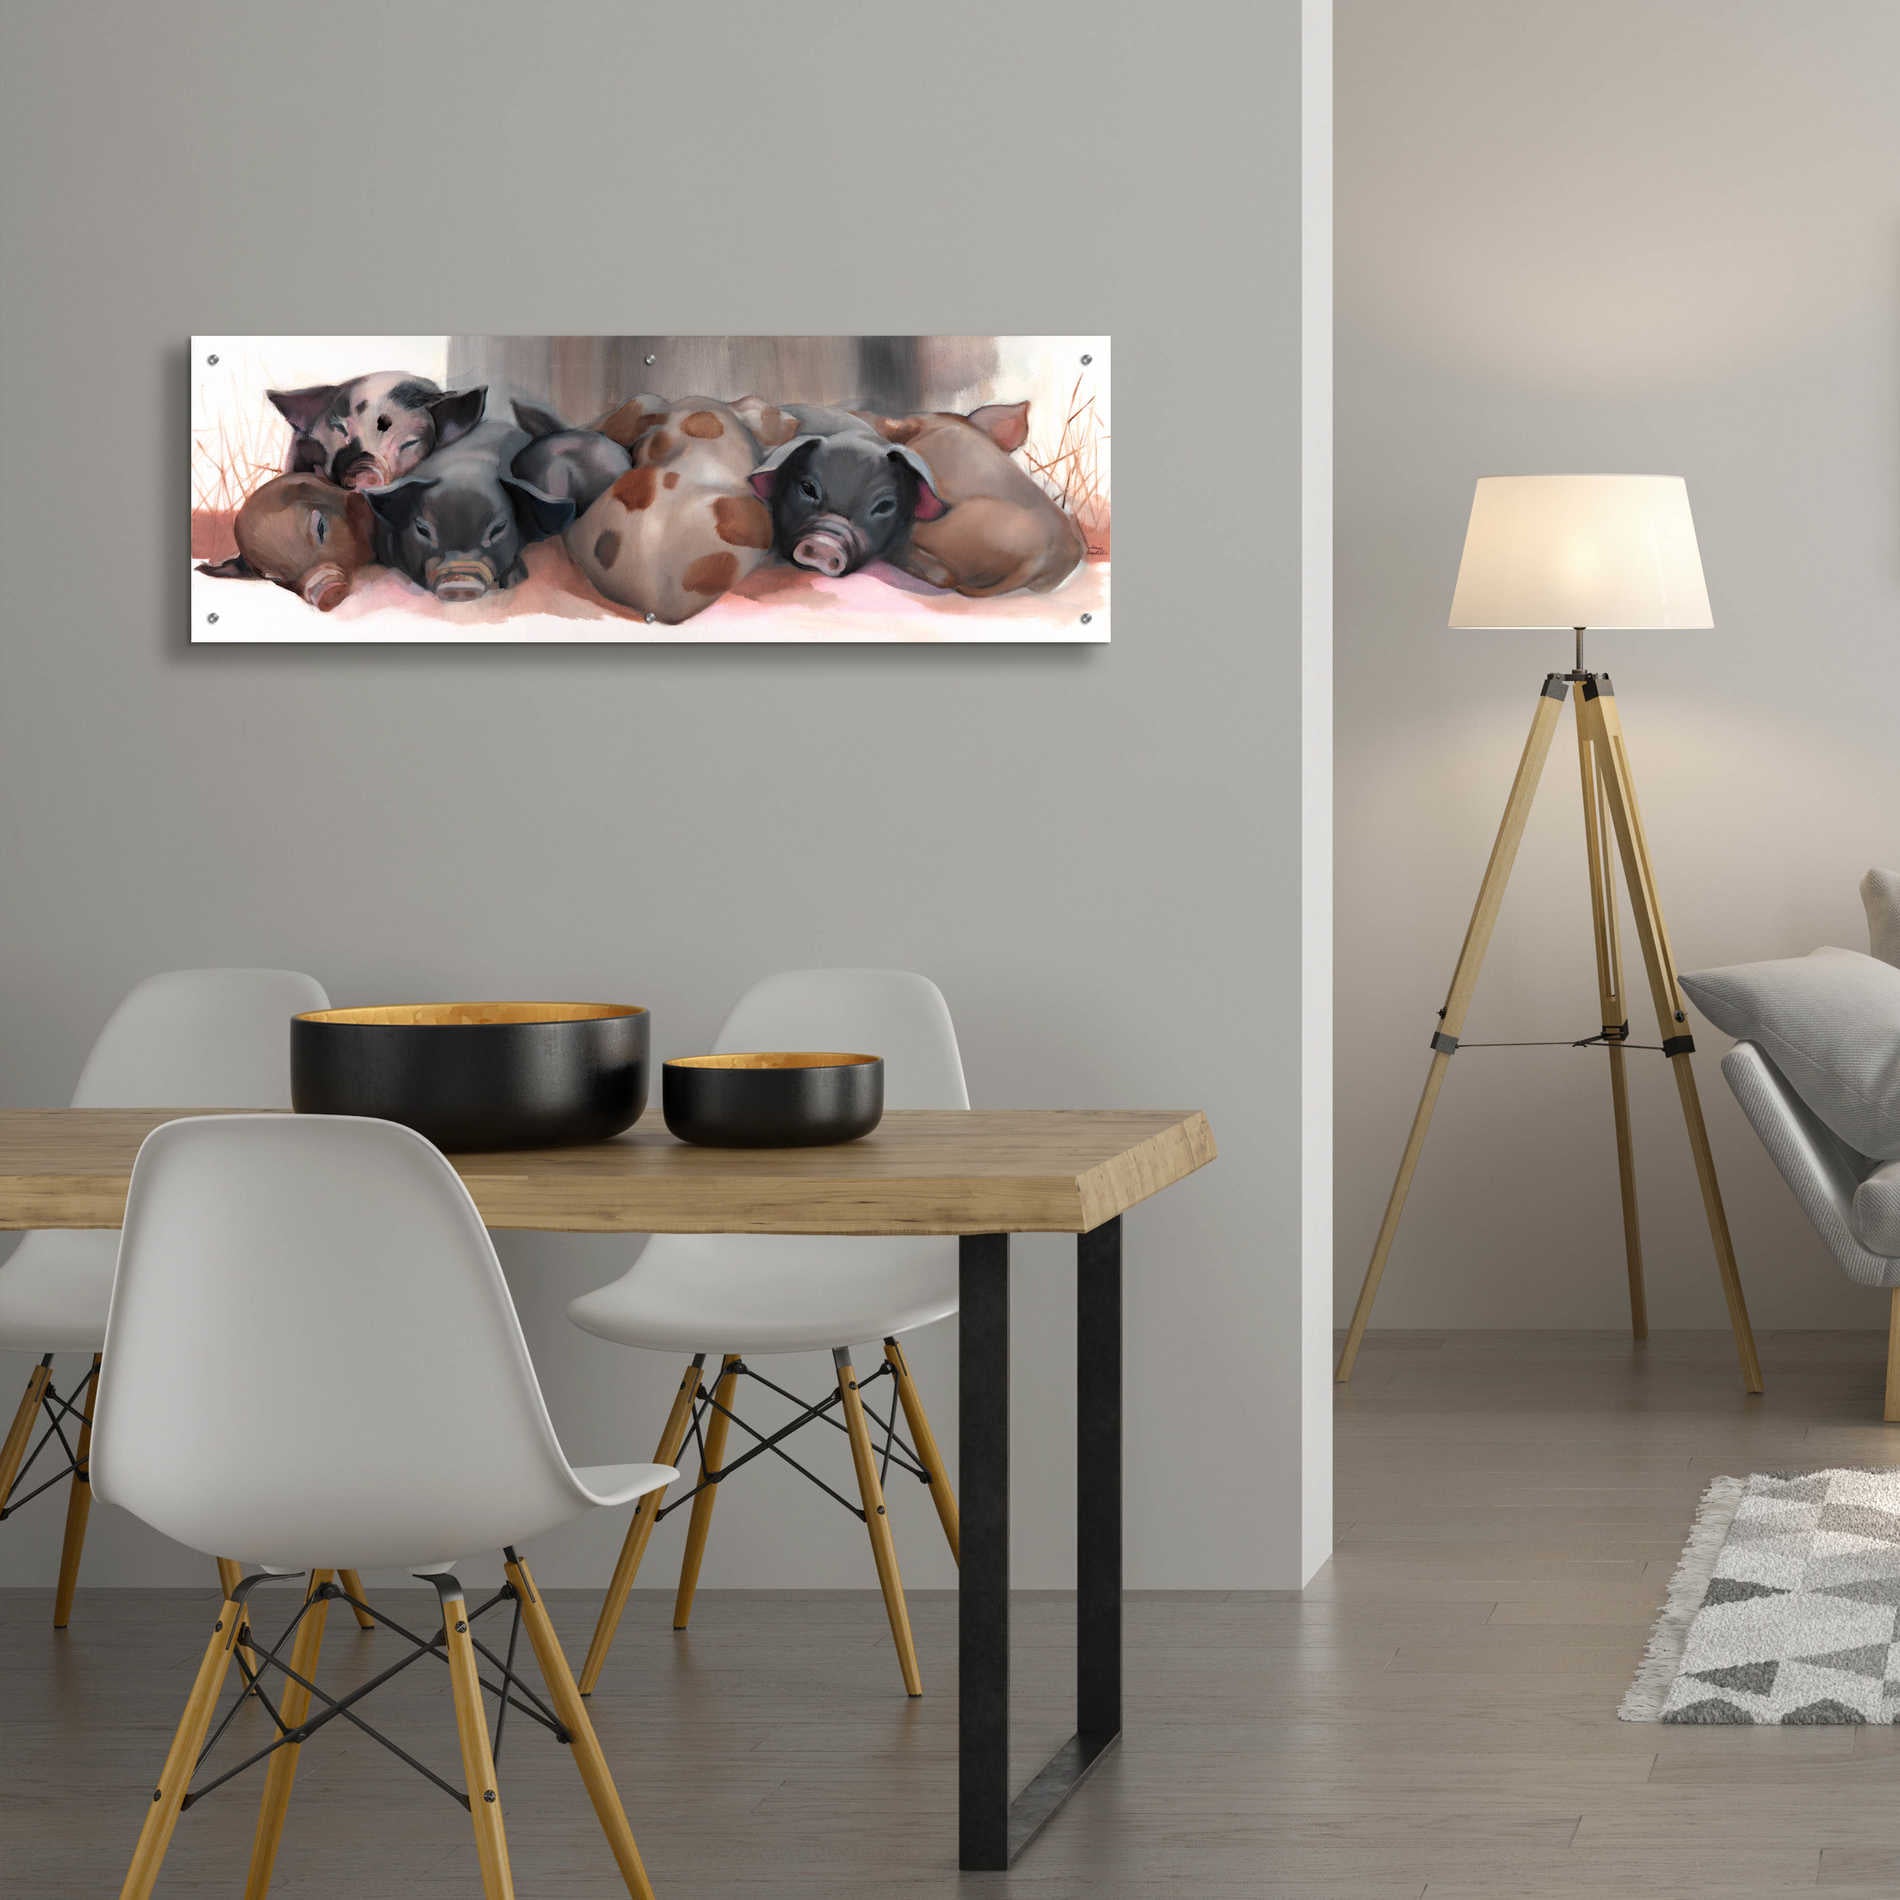 Epic Art 'Pig Pile' by Louise Montillio Acrylic Glass Wall Art,48x16